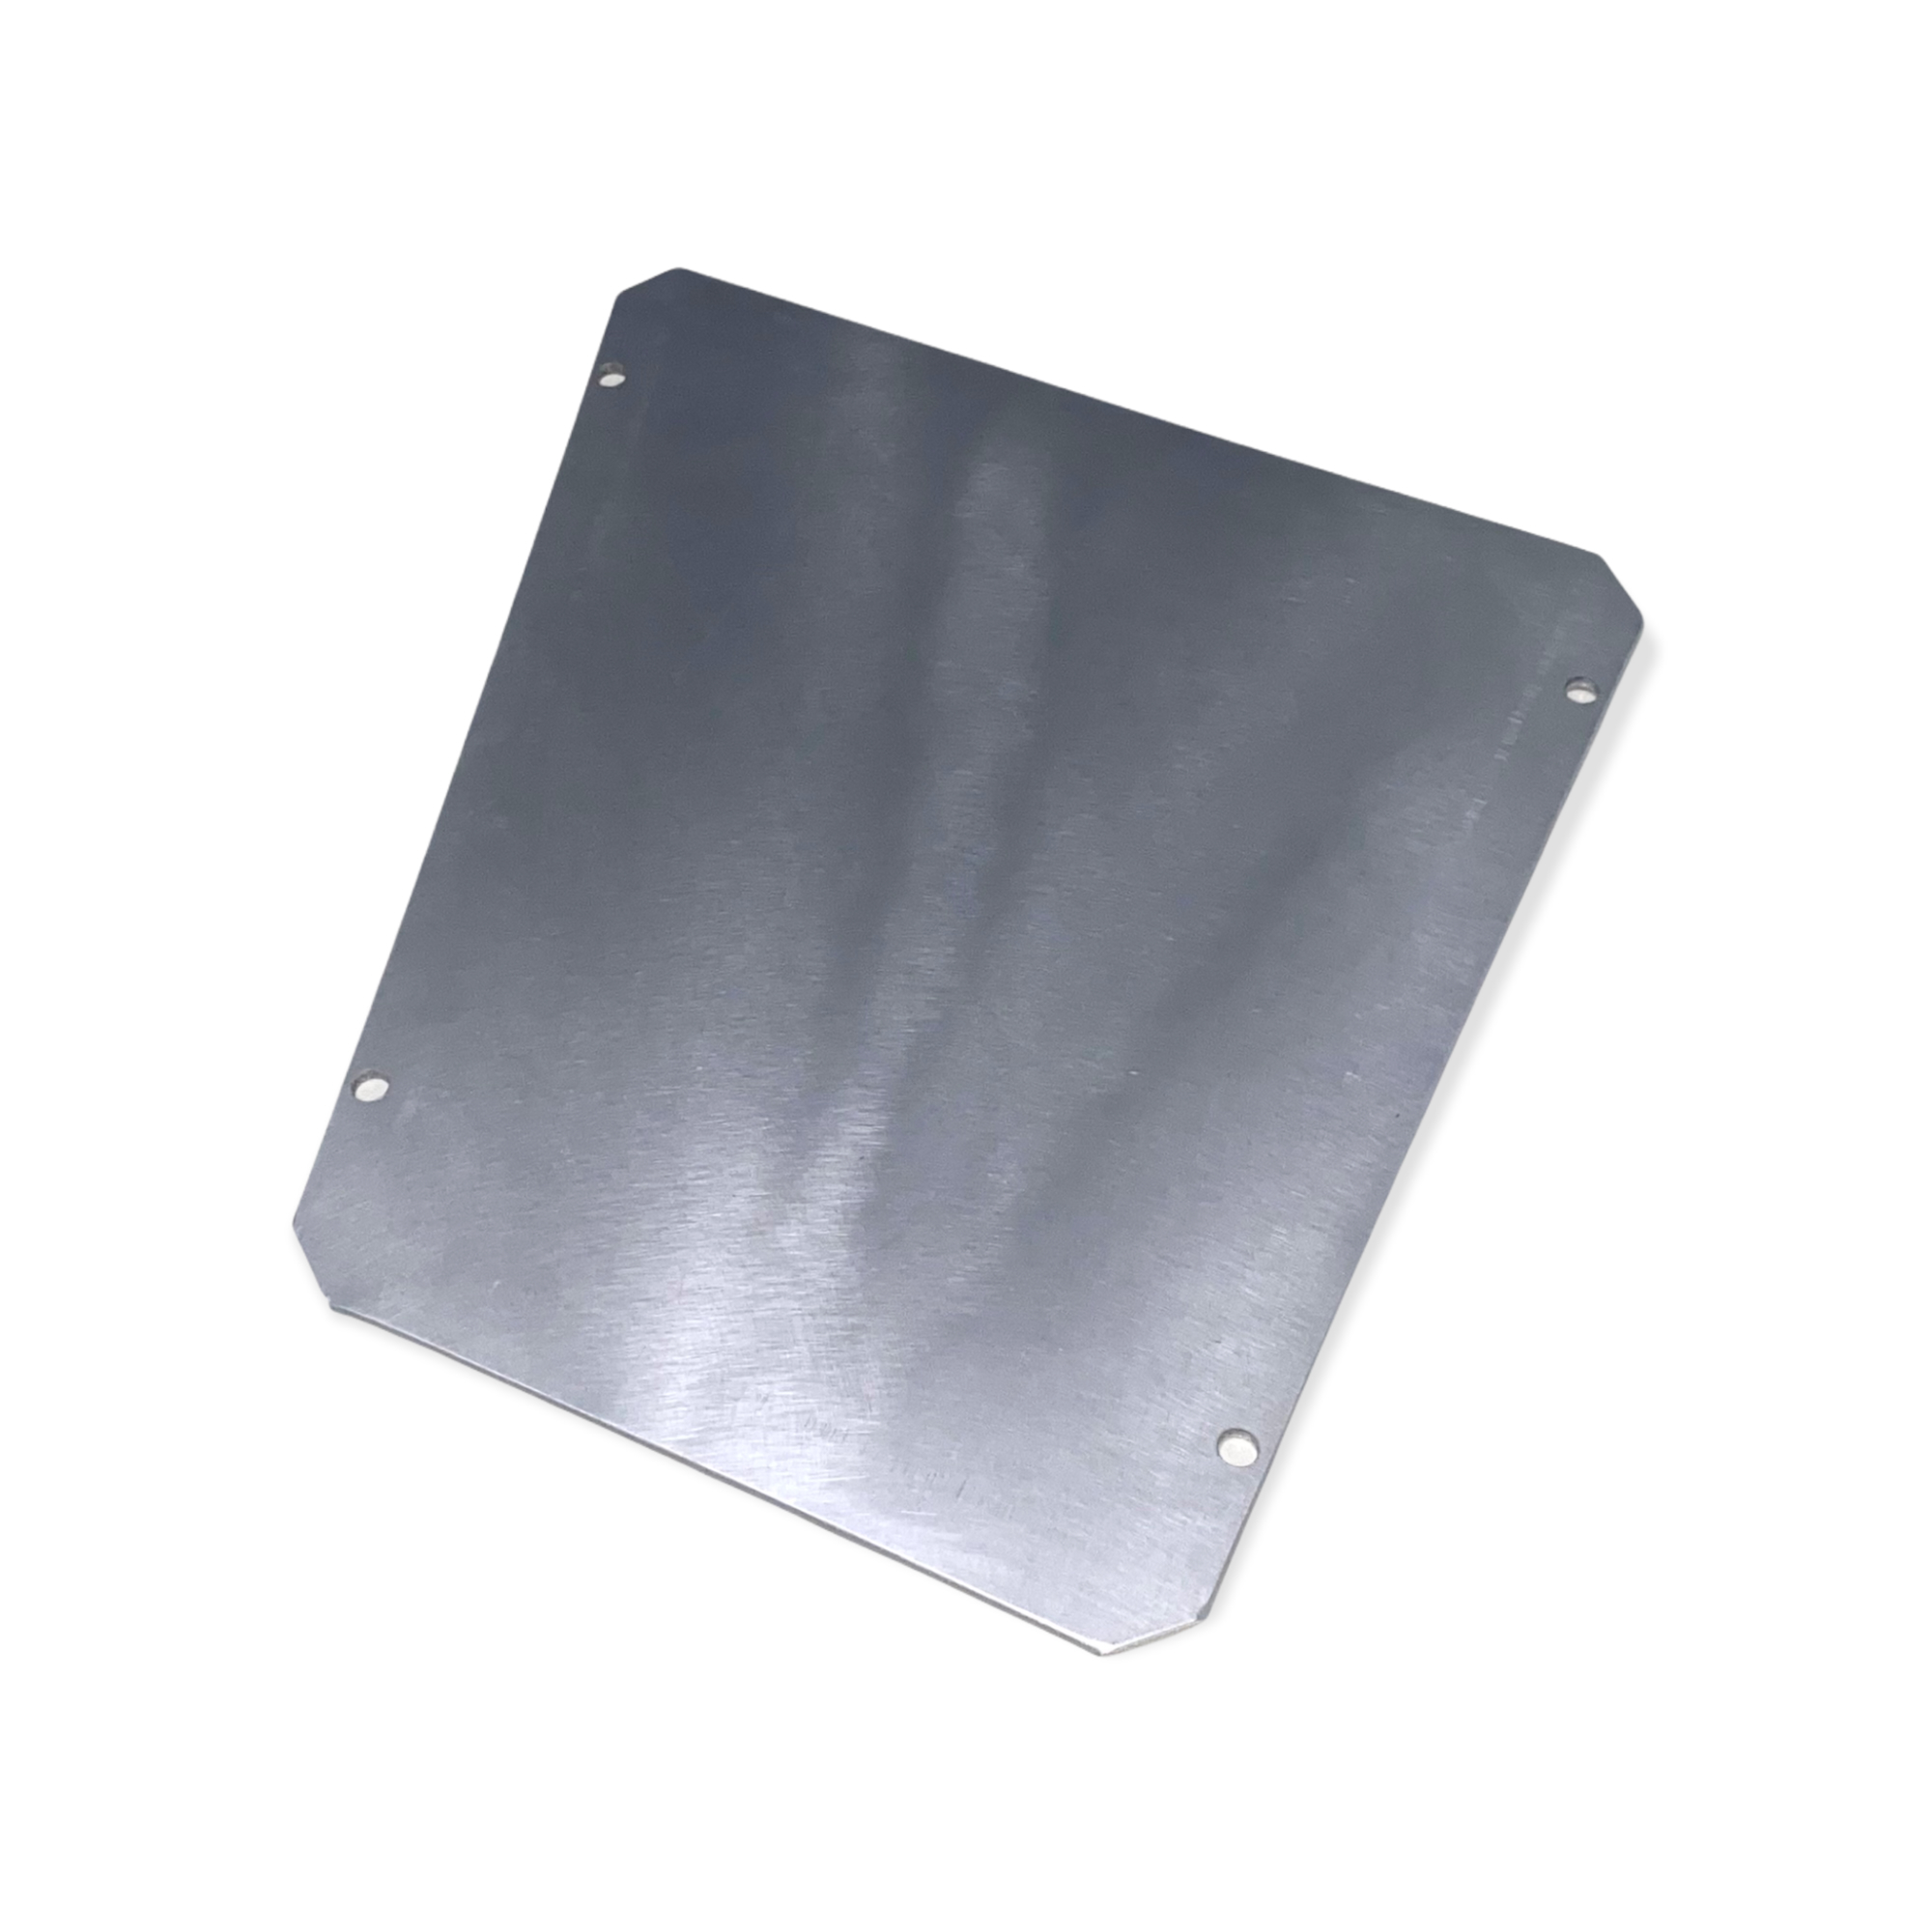 LC440  Steering box access cover (ALUMINUM) panel (1950-51) fits LHD+RHD